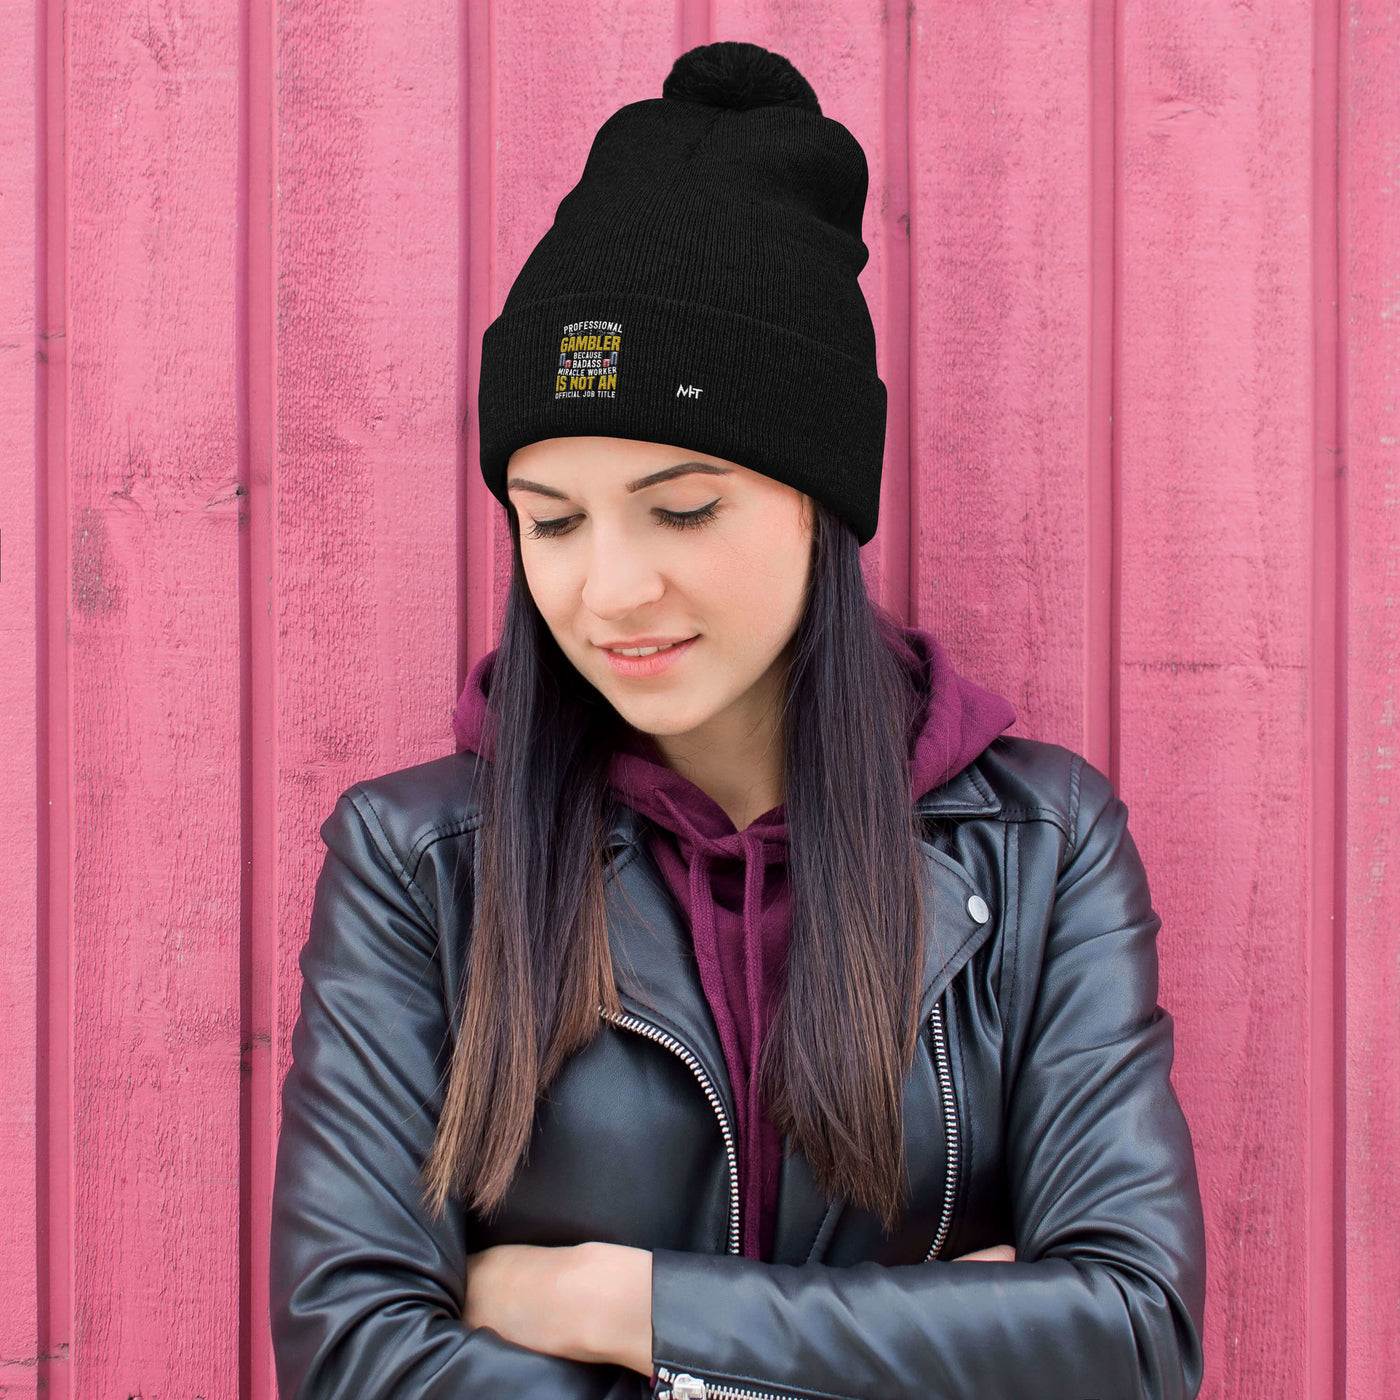 Professional Gambler because Badass Miracle Worker is an official Job Title - Pom-Pom Beanie